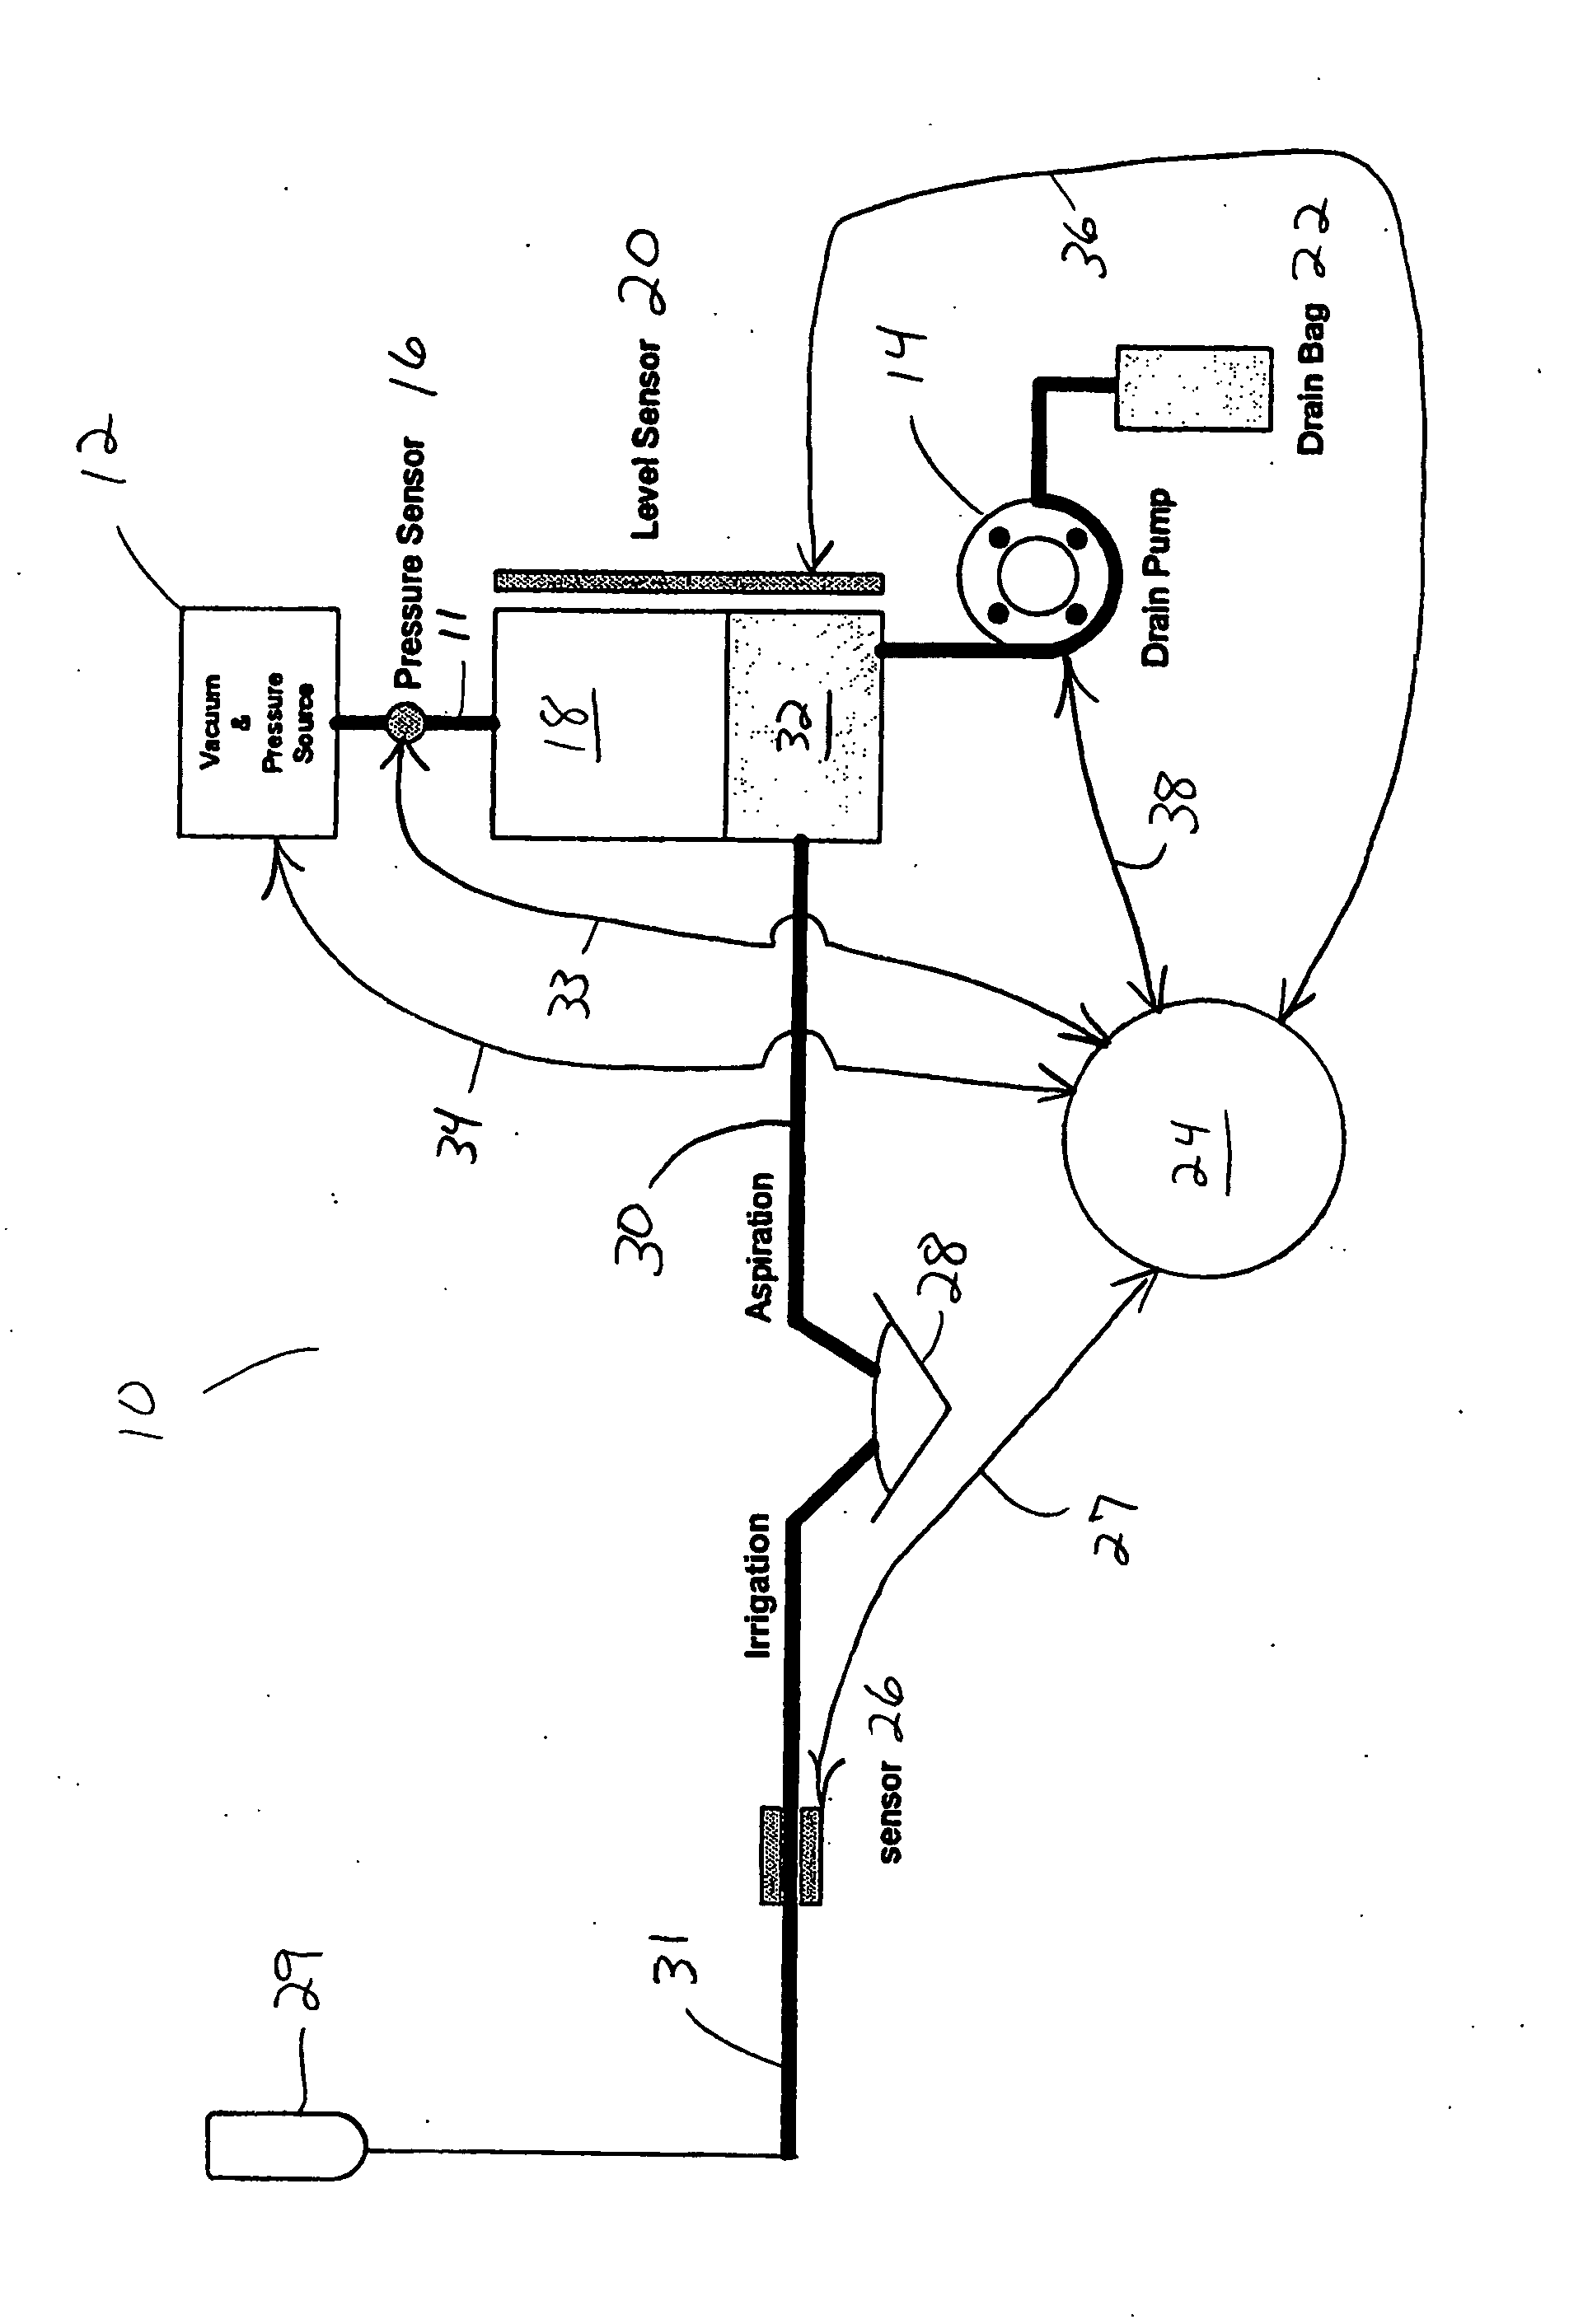 Method of controlling an irrigation/aspiration system